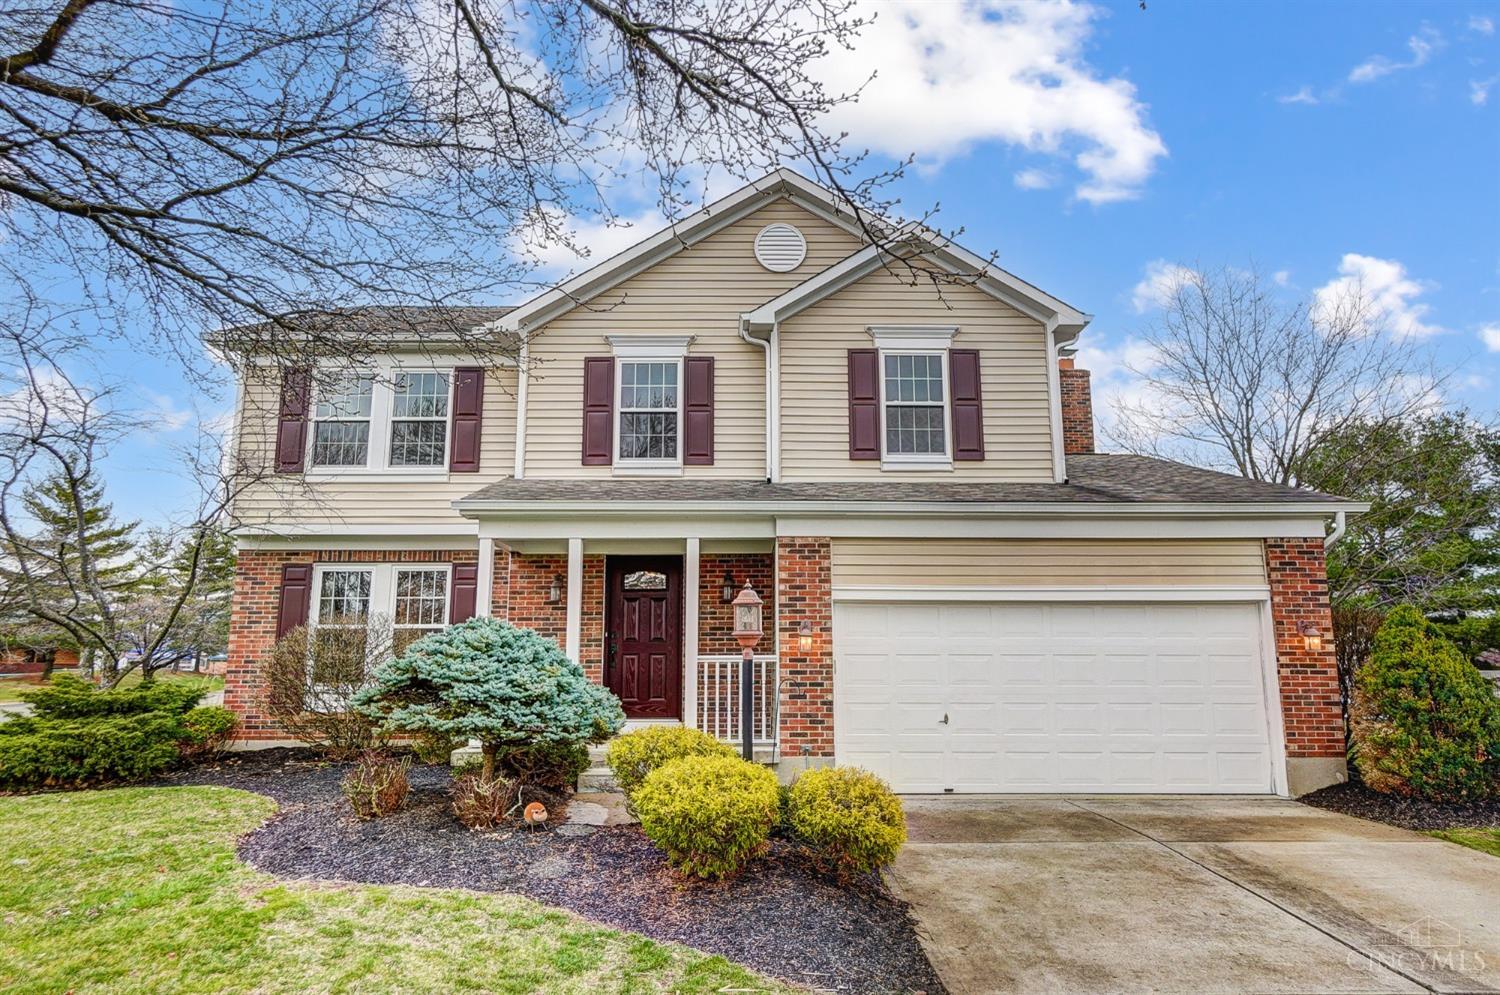 8844 Rambling Ridge Dr, West Chester, OH 45069